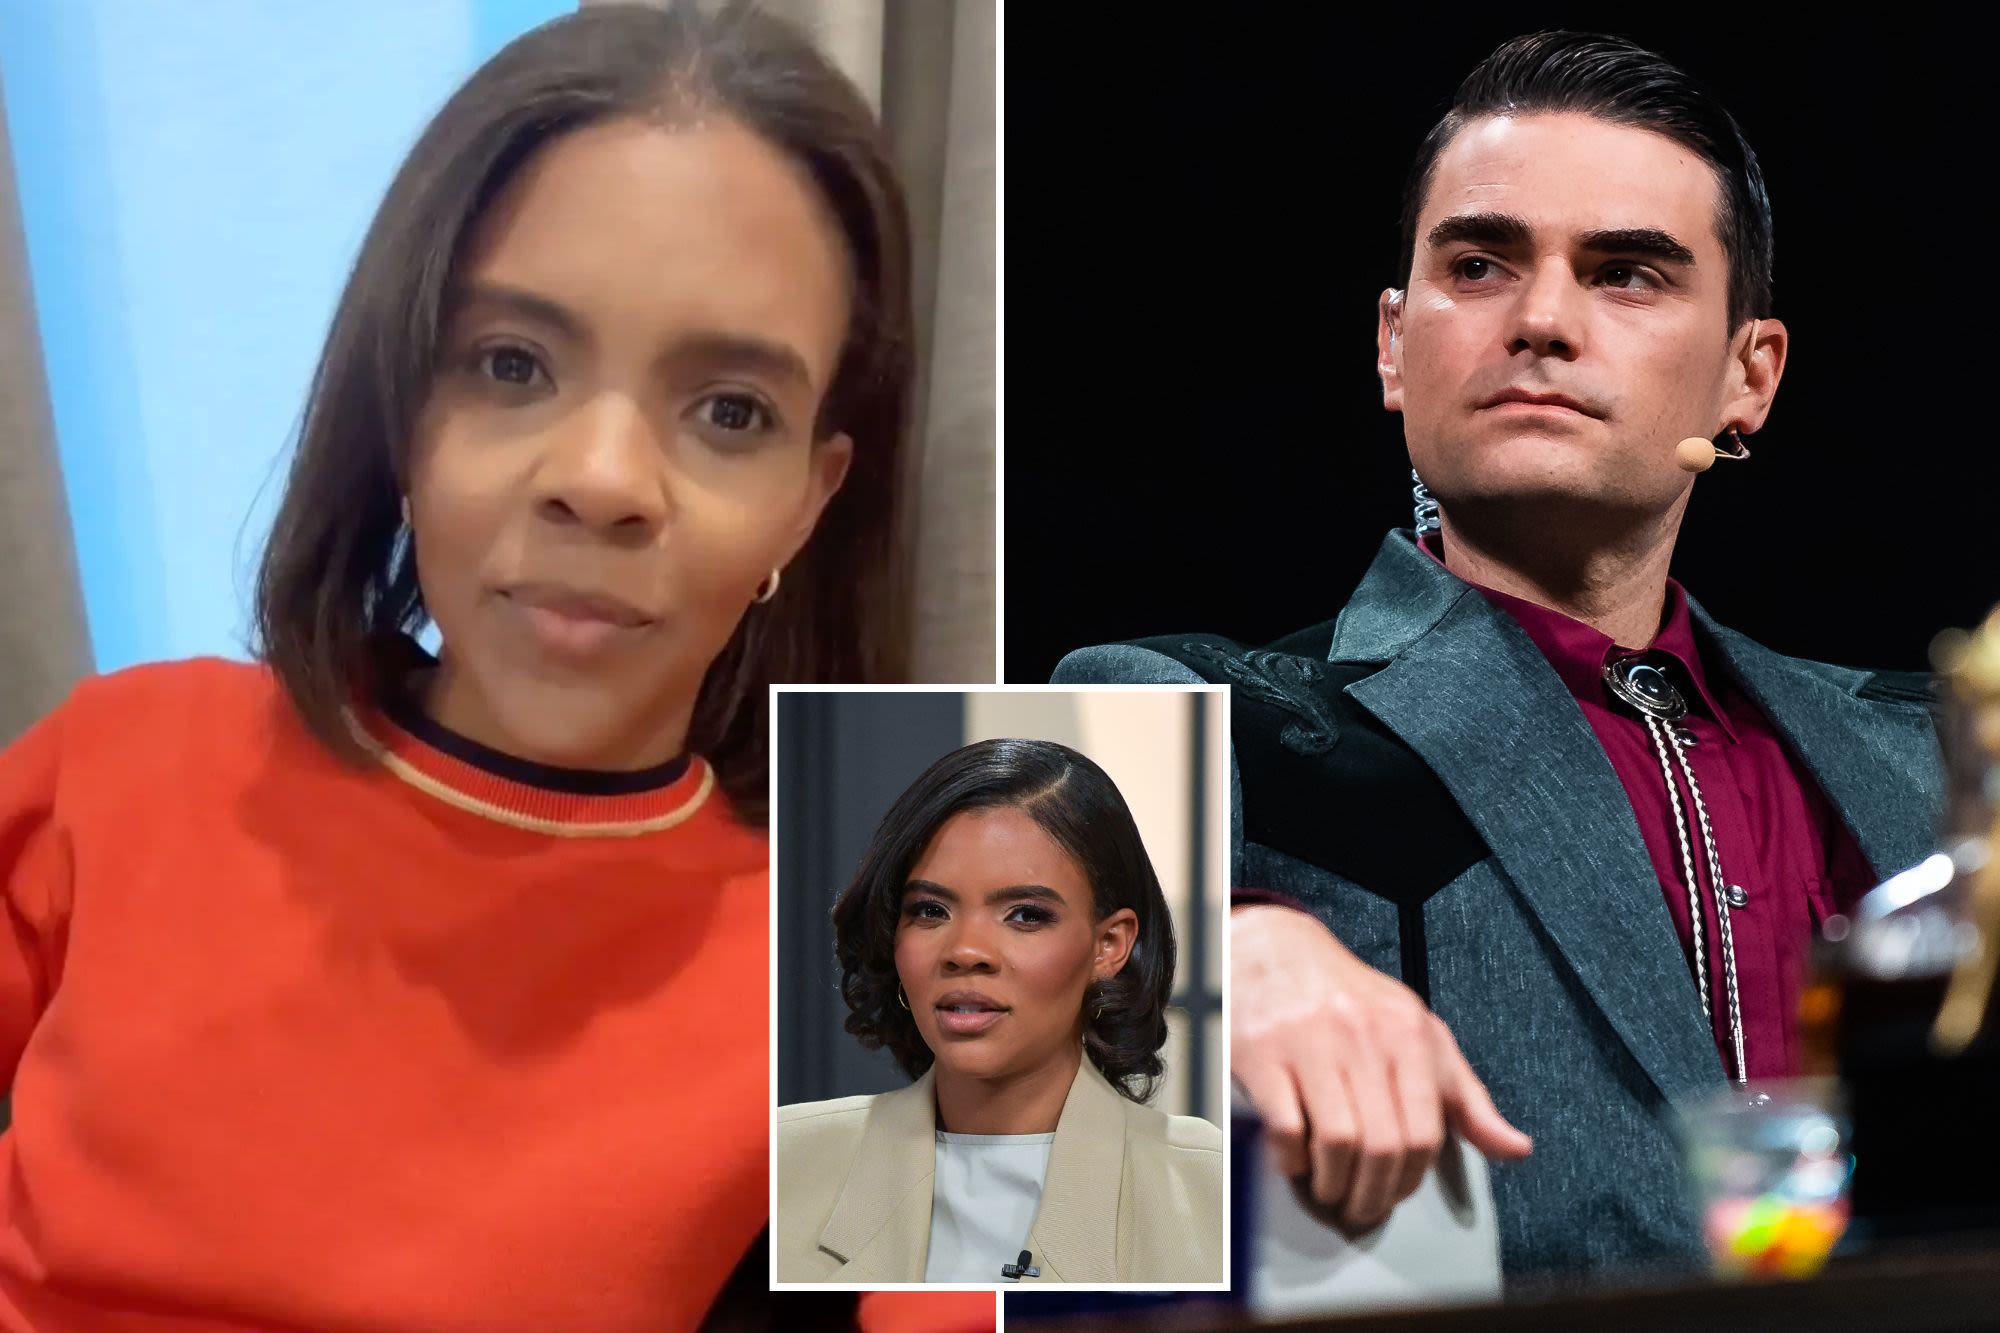 Candace Owens blasts Daily Wire, says it’s leaking antisemitism claims: Attacked for ‘being a Christian’